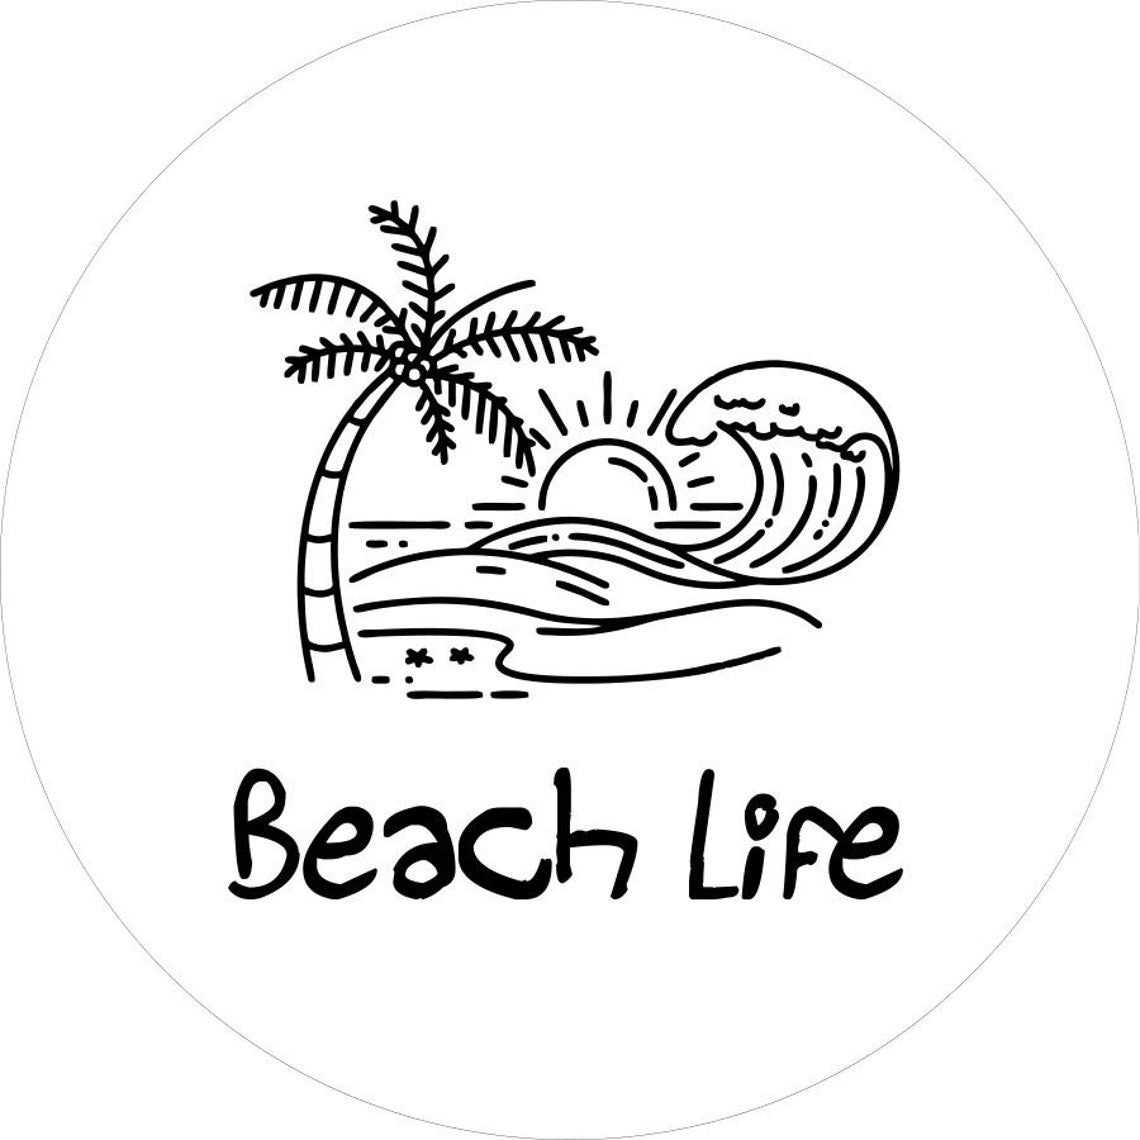 Hand-drawn simple beach scene design with waves and sunset & "beach life" written across the bottom. on white vinyl for Jeep, Bronco, RV, Camper, Trailer, spare tire cover